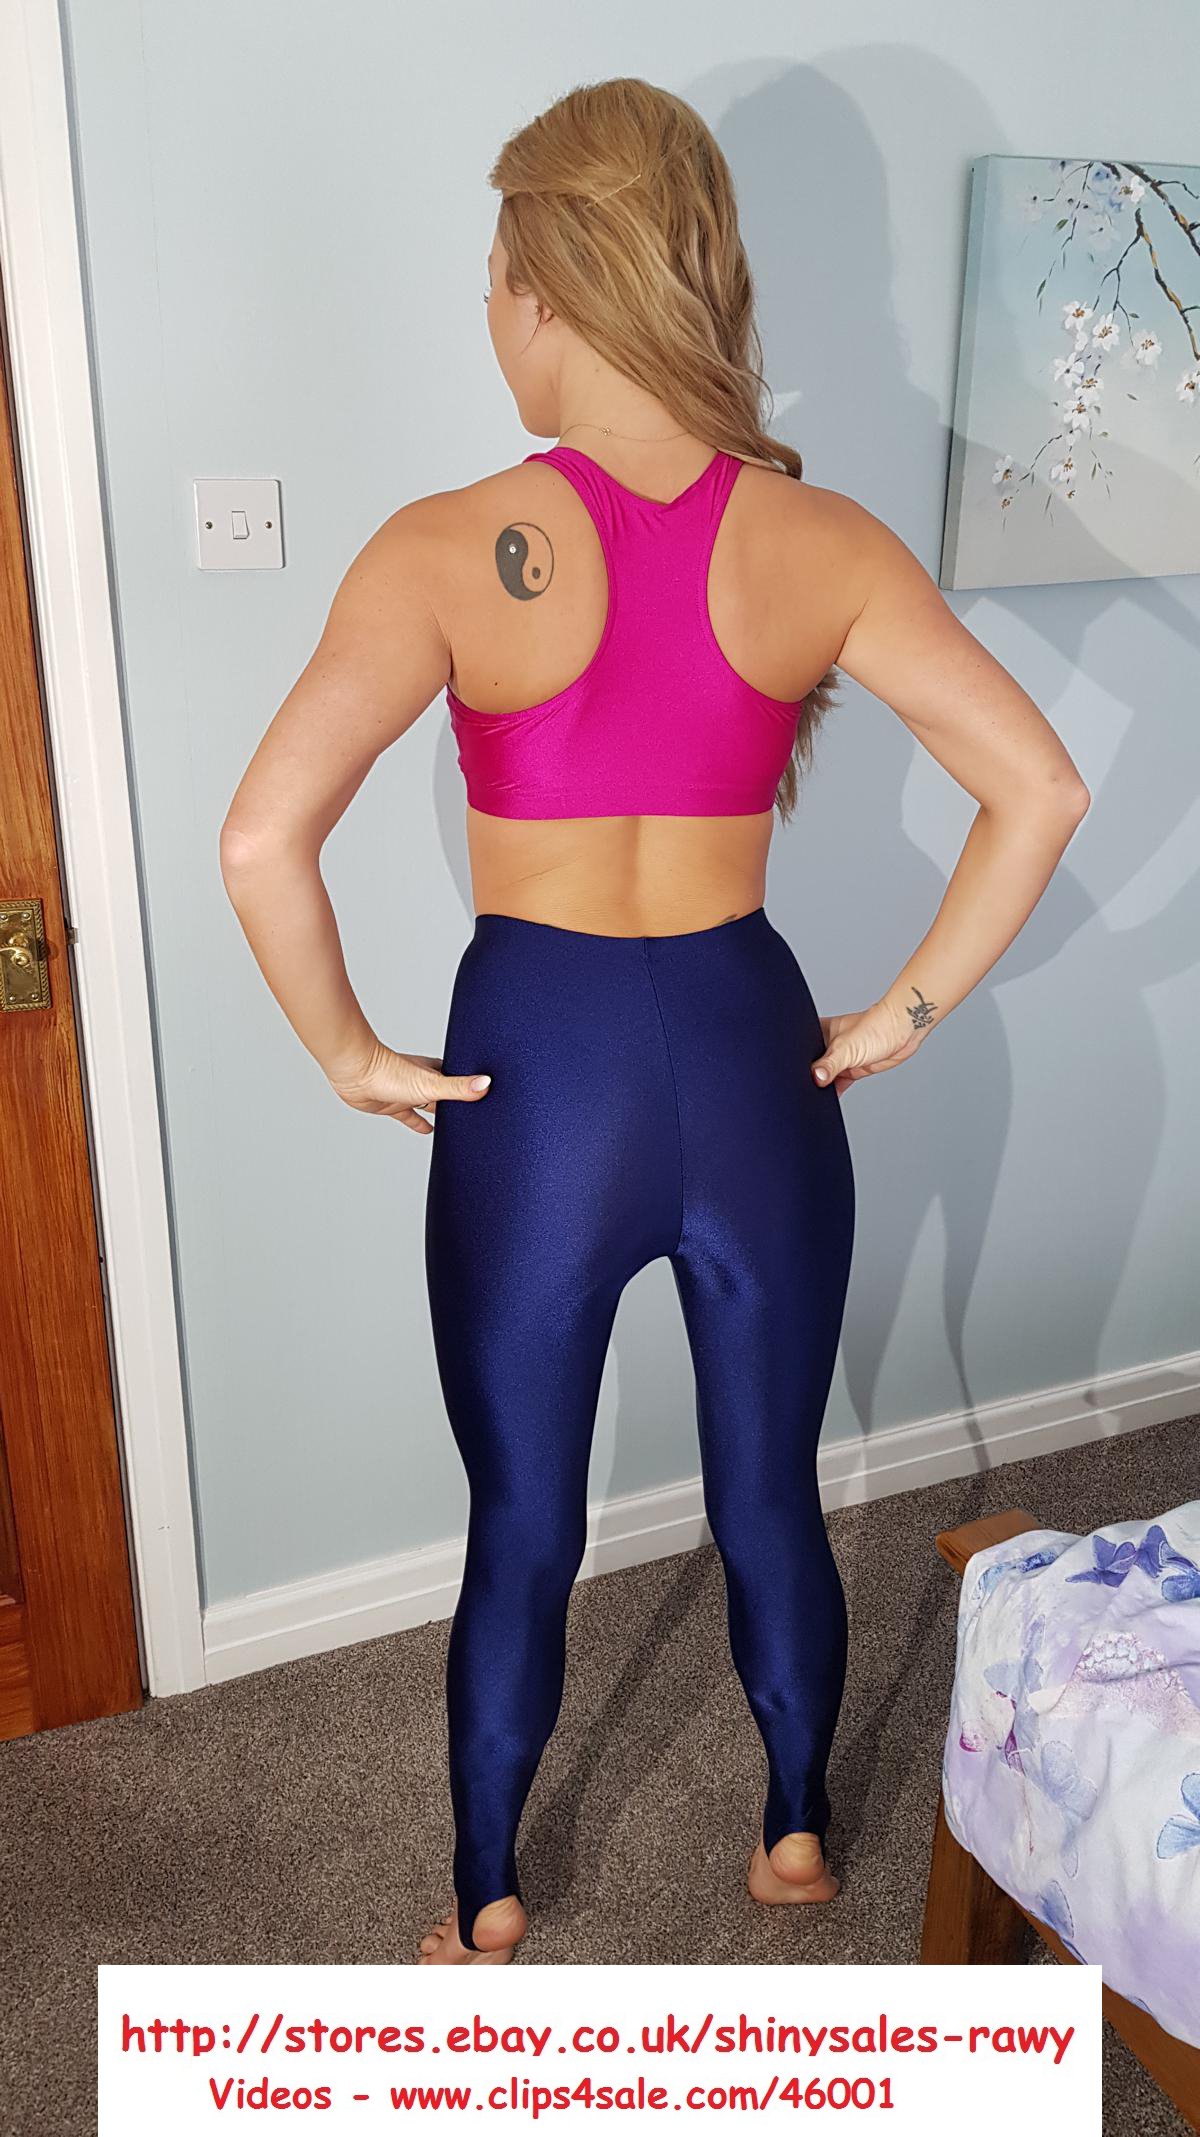 ShinySalesRawy on X: Ultra Shiny Tight Blue Spandex Leggings worn by  Rachelle selling in the next 24hrs on  for under £1! -   - Don't Miss them, Bid Now! @TweetRSummers  #spandexleggings #